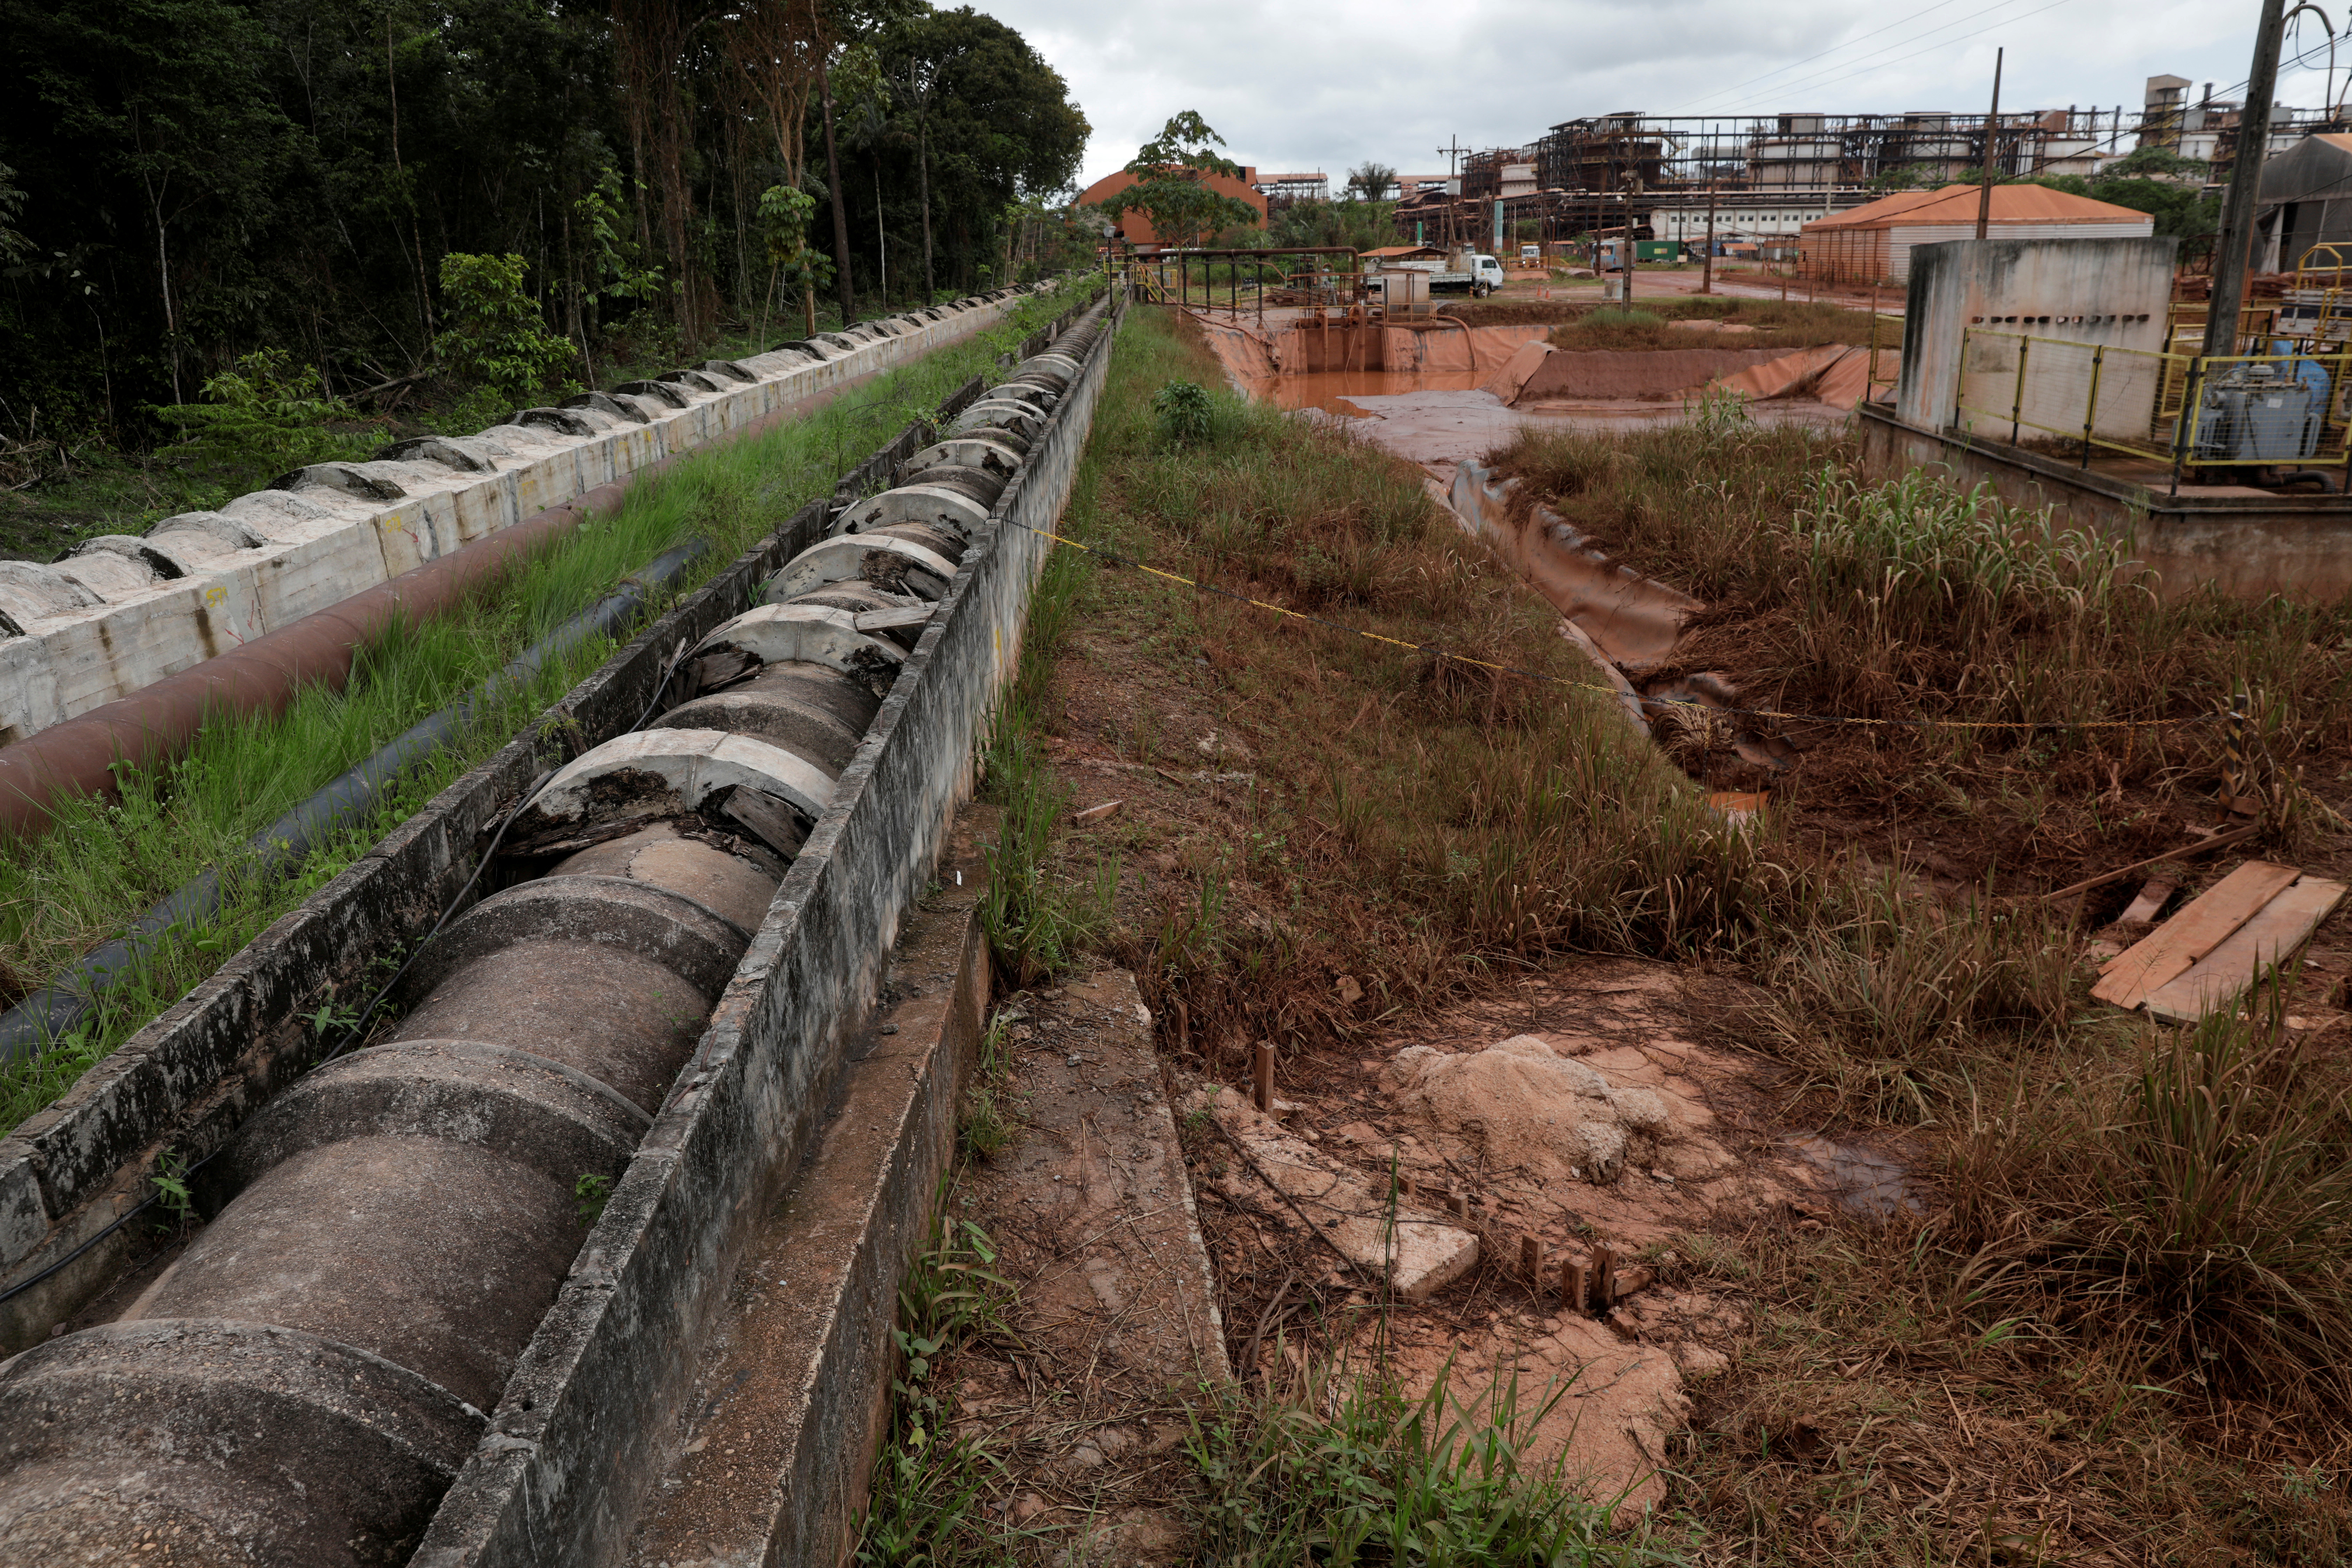 Concrete pipes connecting the bauxite residue deposit to its water treatment station are pictured at the alumina refinery Alunorte, owned by Norwegian company Norsk Hydro ASA, in Barcarena